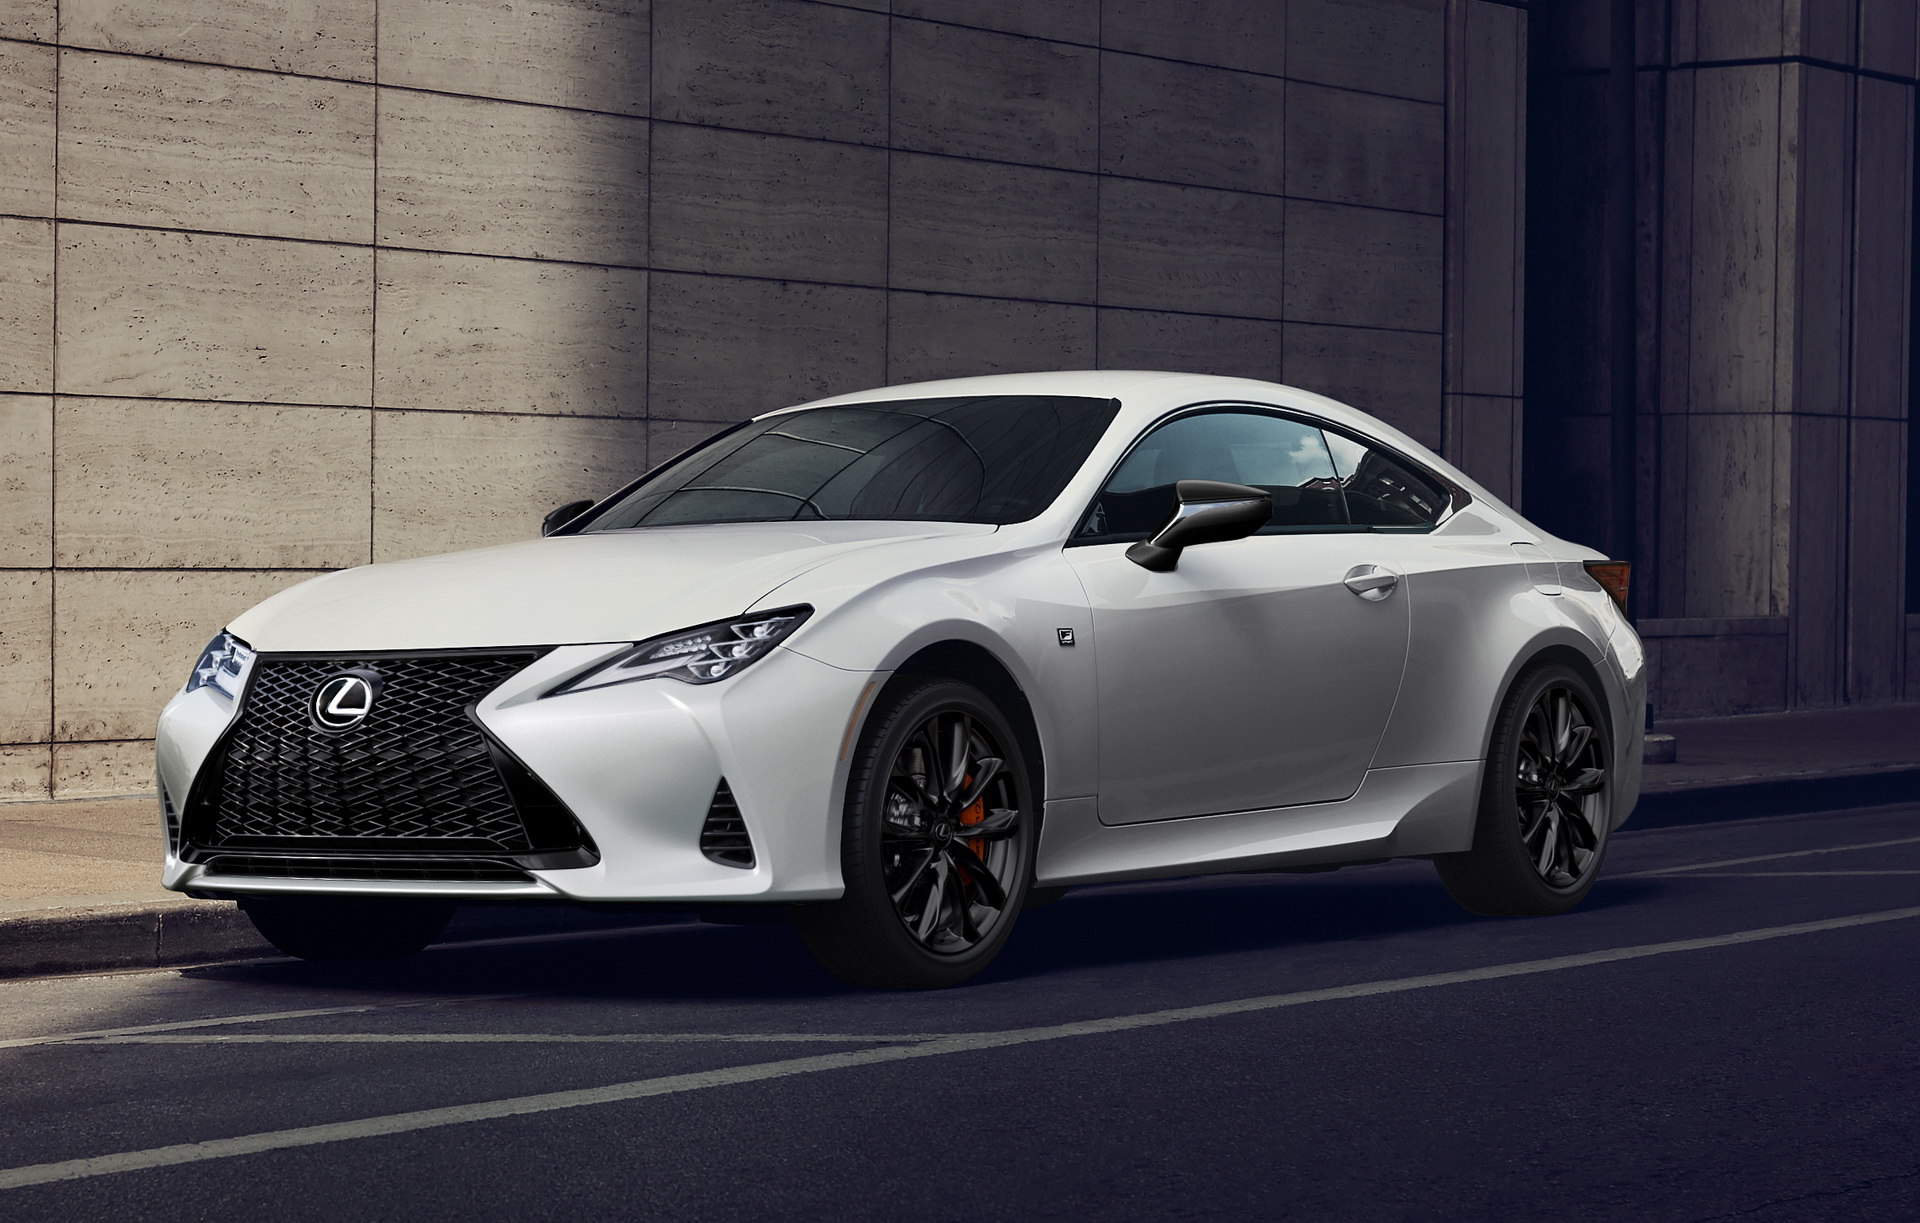 What's New For The 2021 Lexus RC Coupe? Why, A Black Line